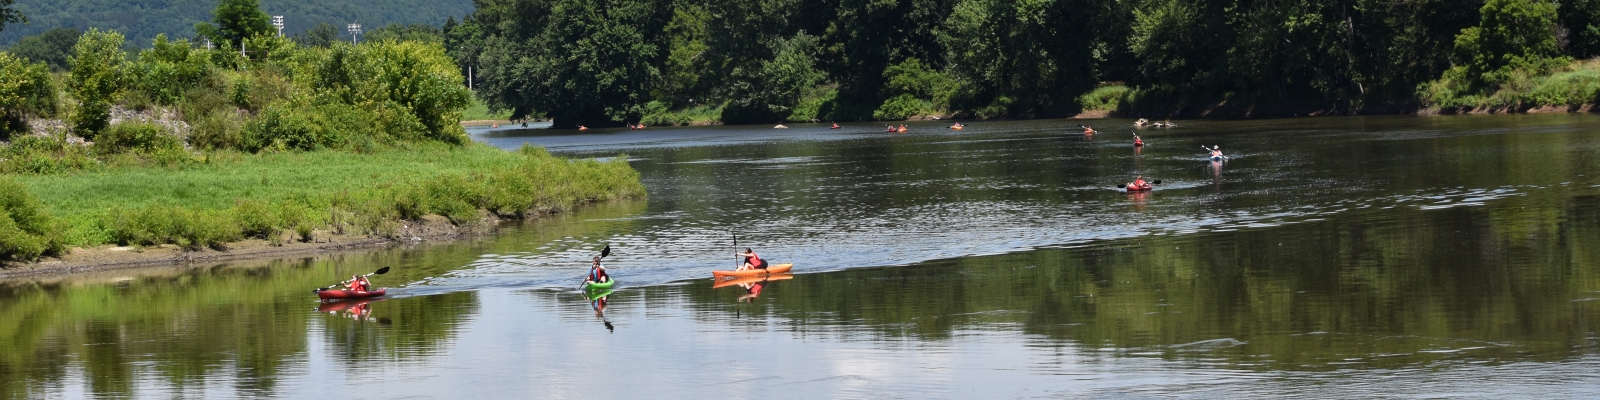 Kayakers on the Allegheny River